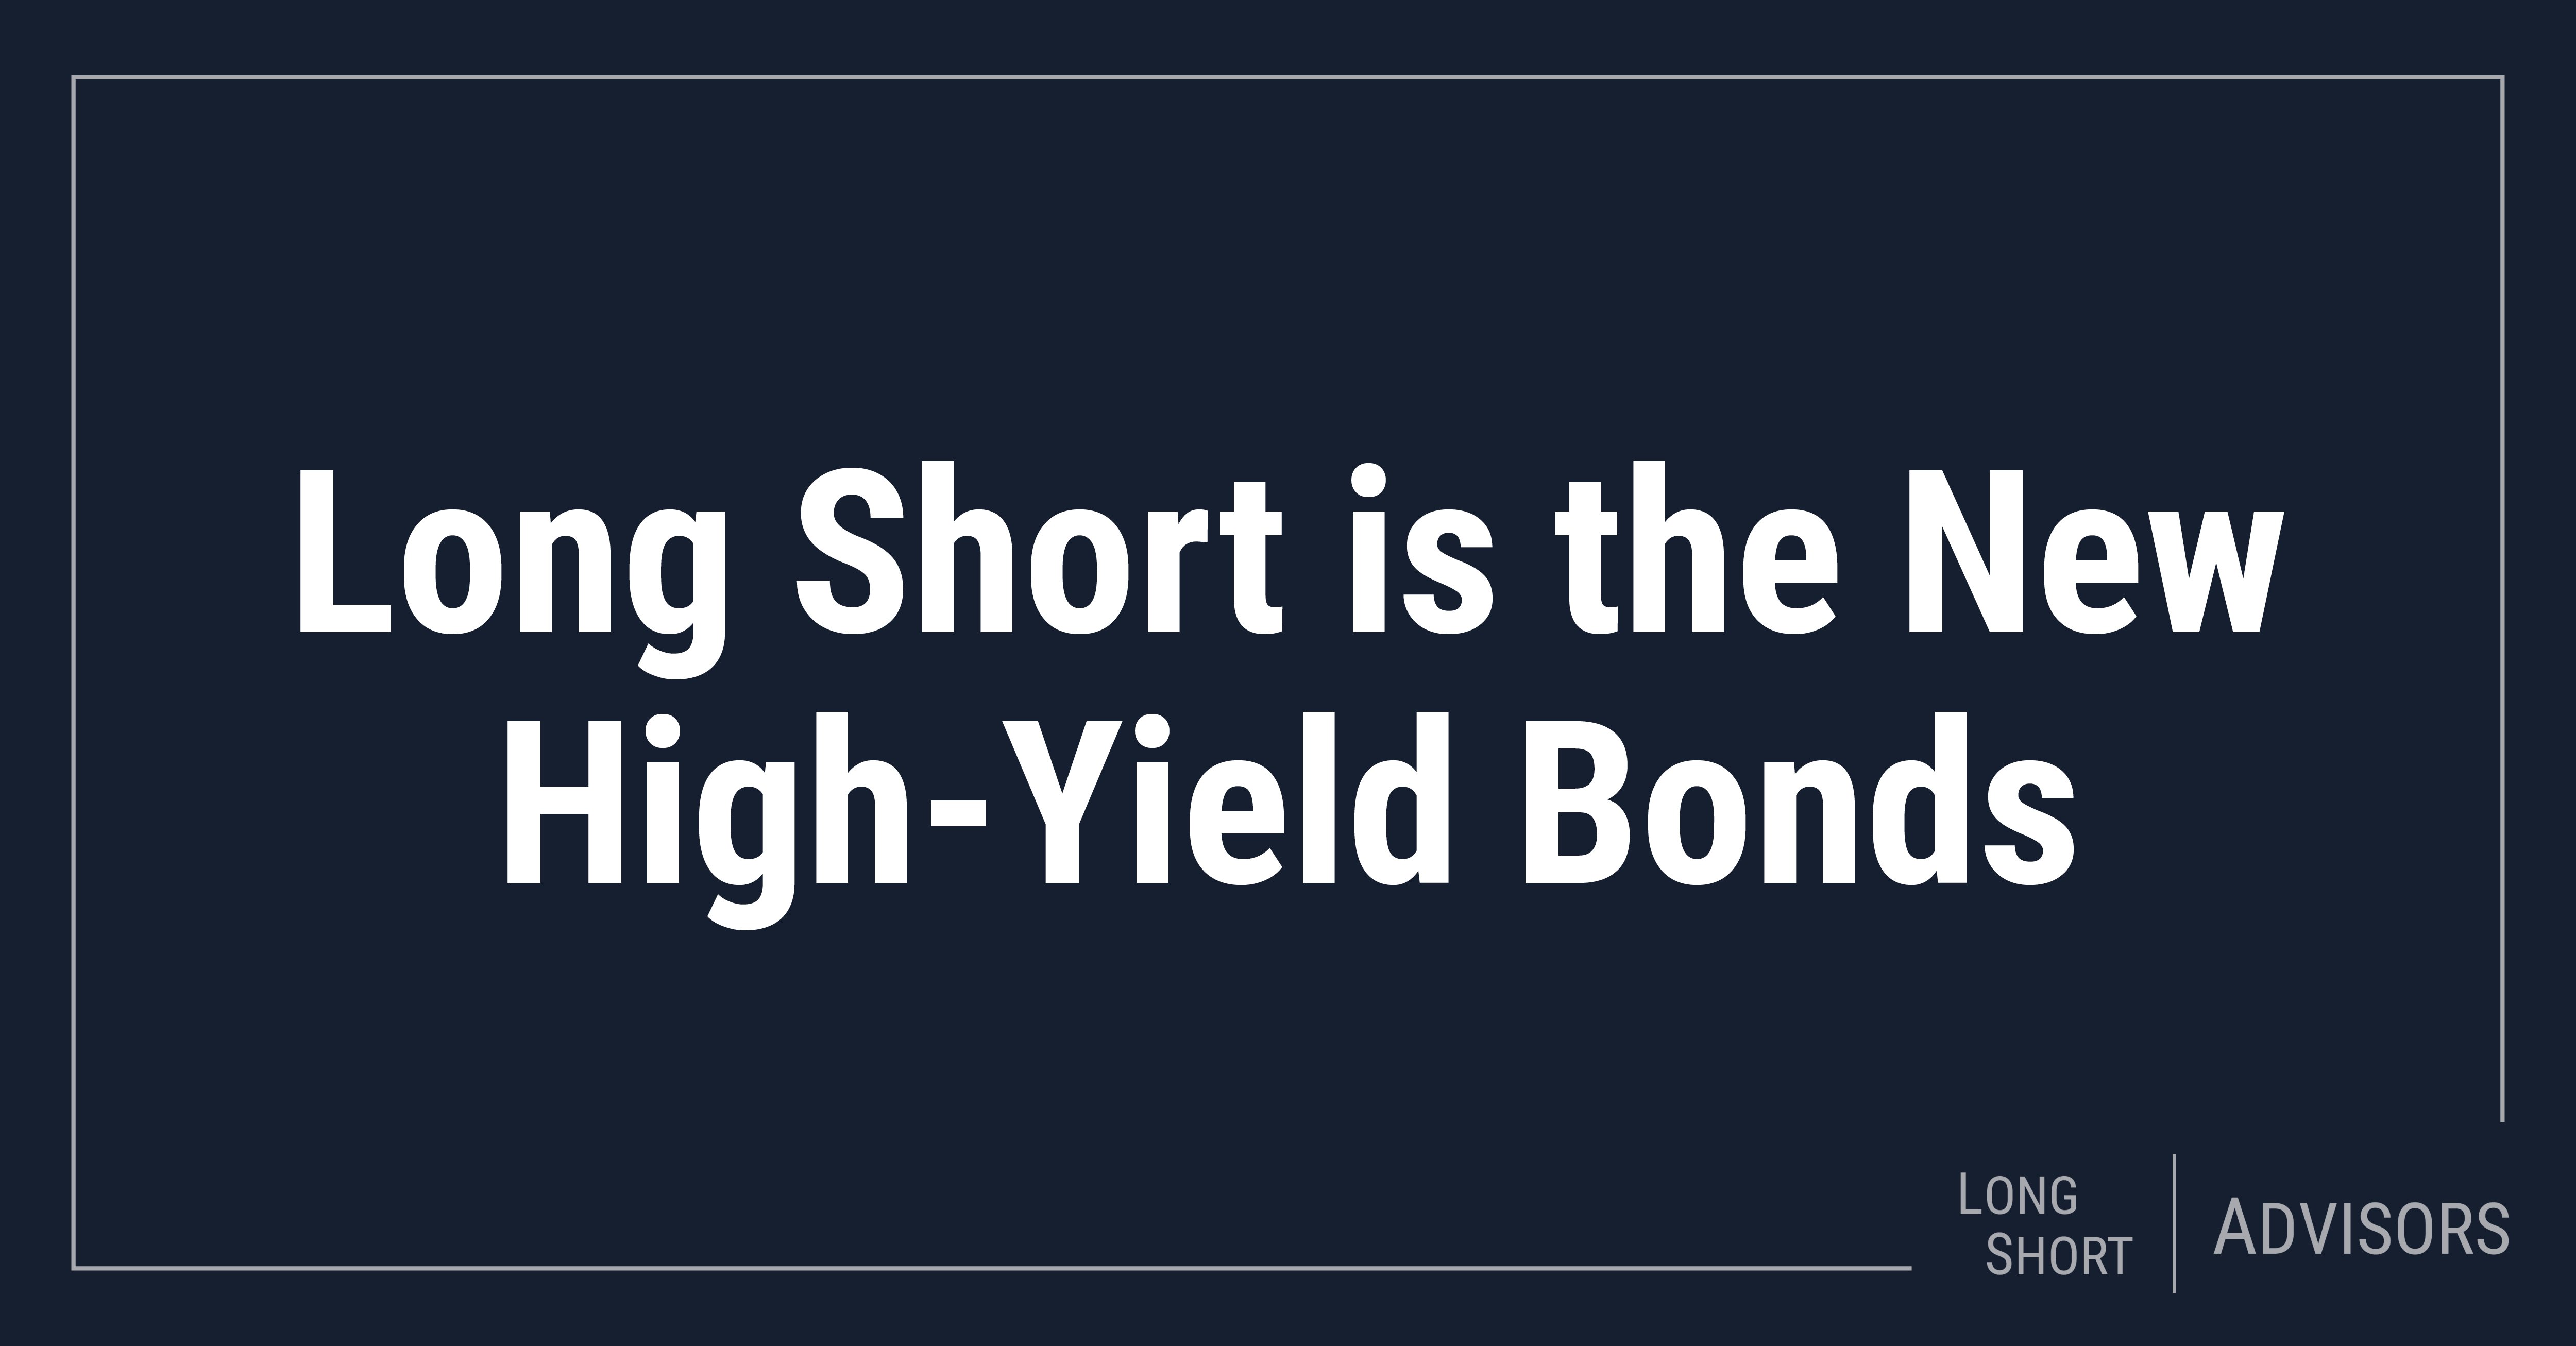 Long Short is the New High-Yield Bonds